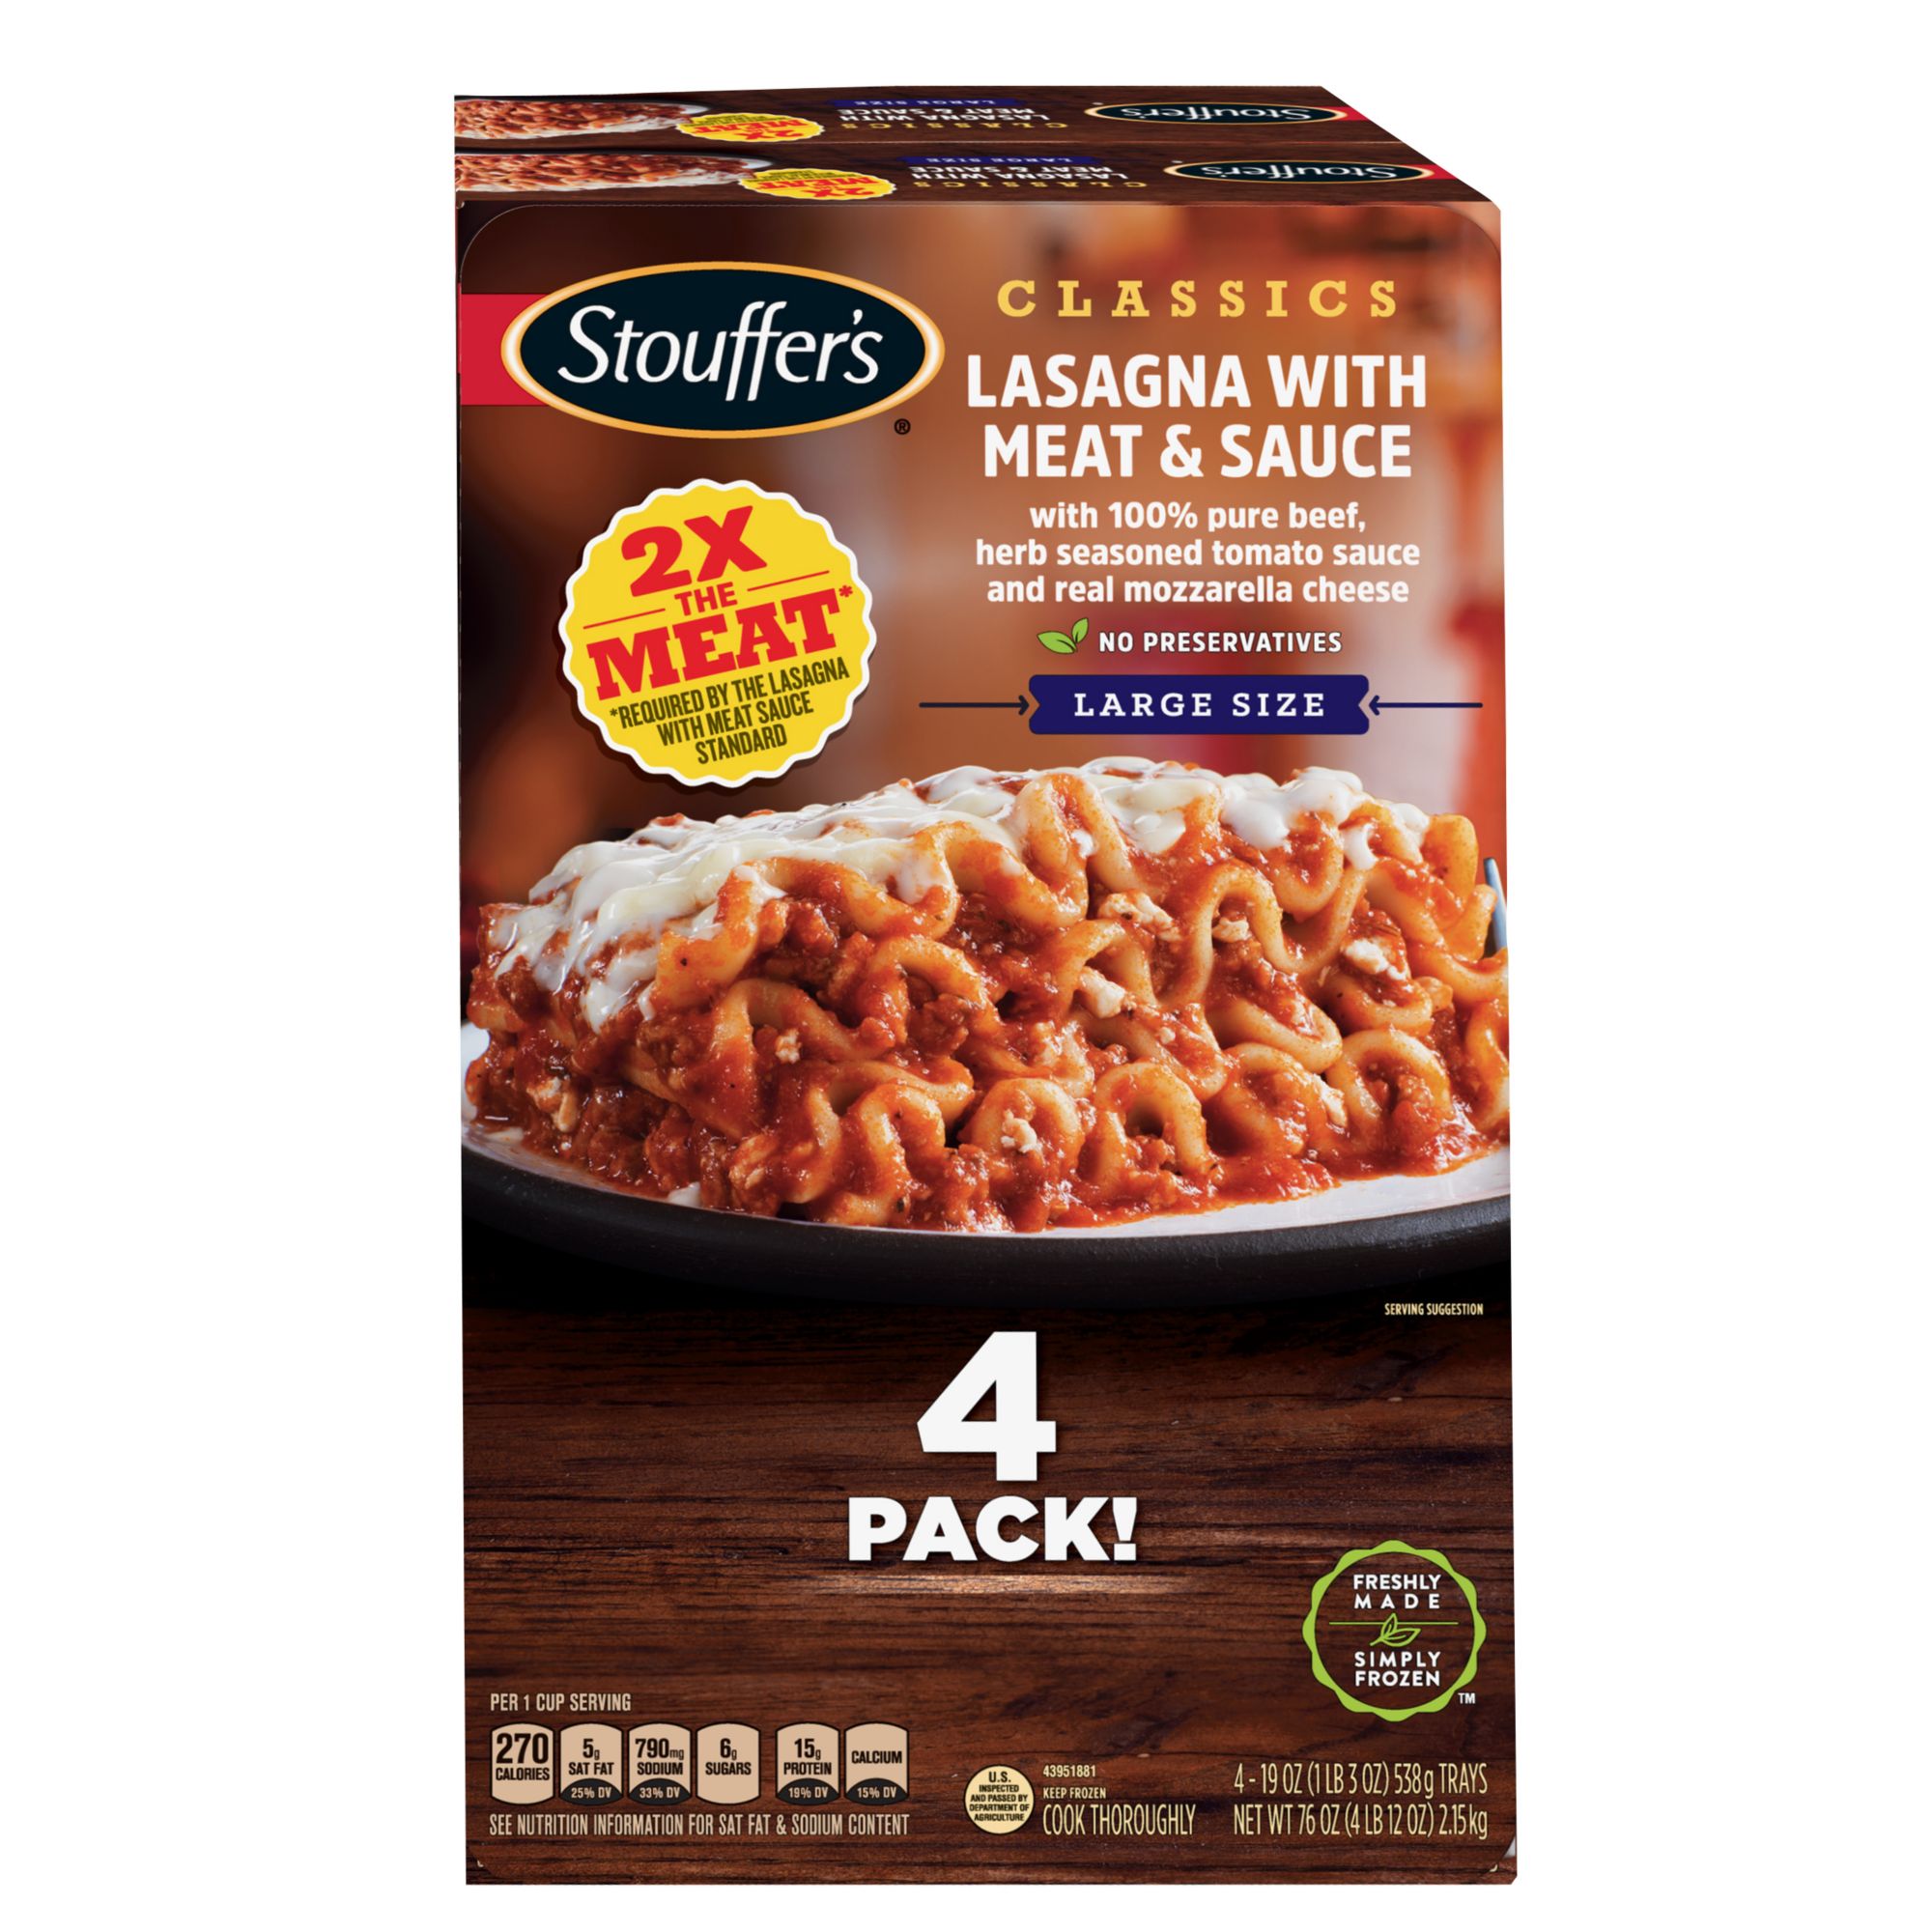 Stouffer's Large Size Lasagna With Meat And Sauce Frozen Meal, 76 oz.